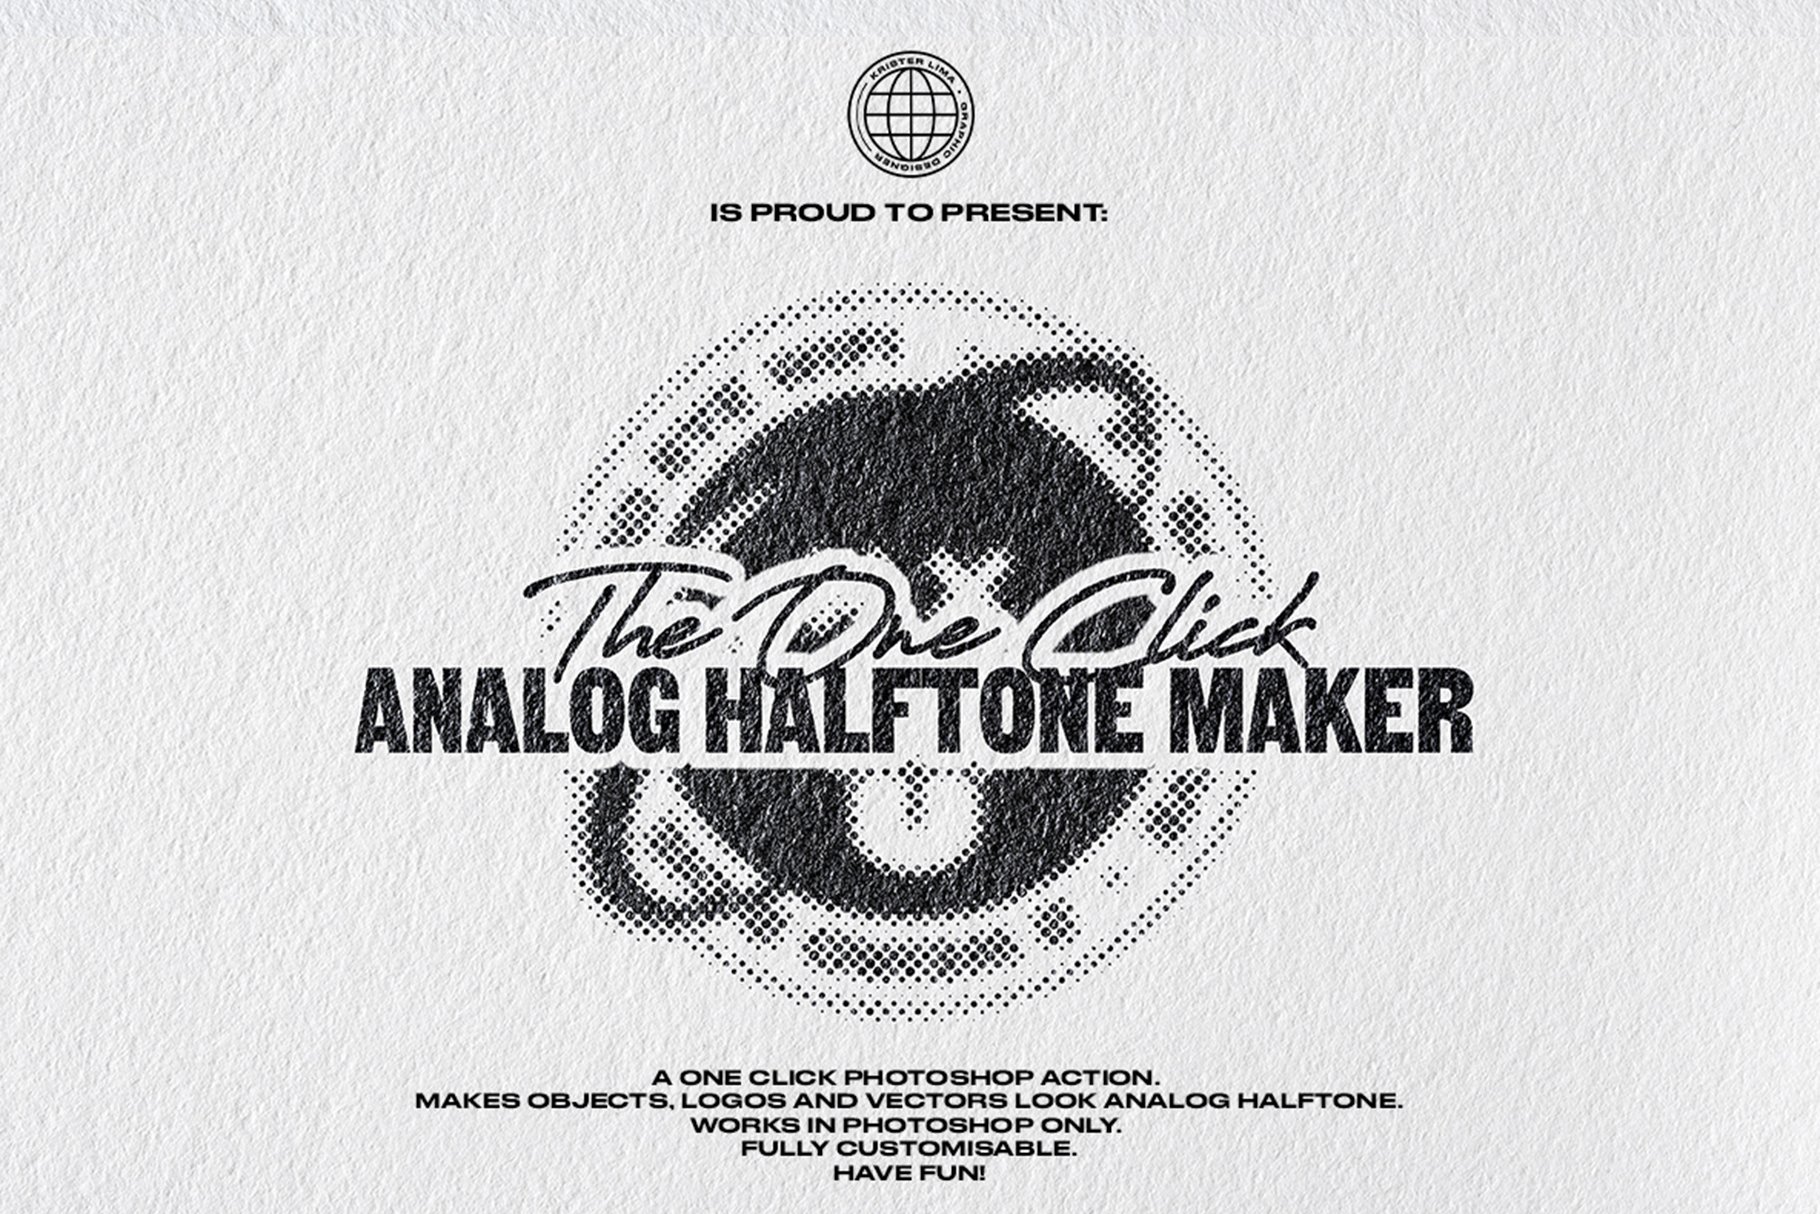 The One Click Analog Halftone Makercover image.